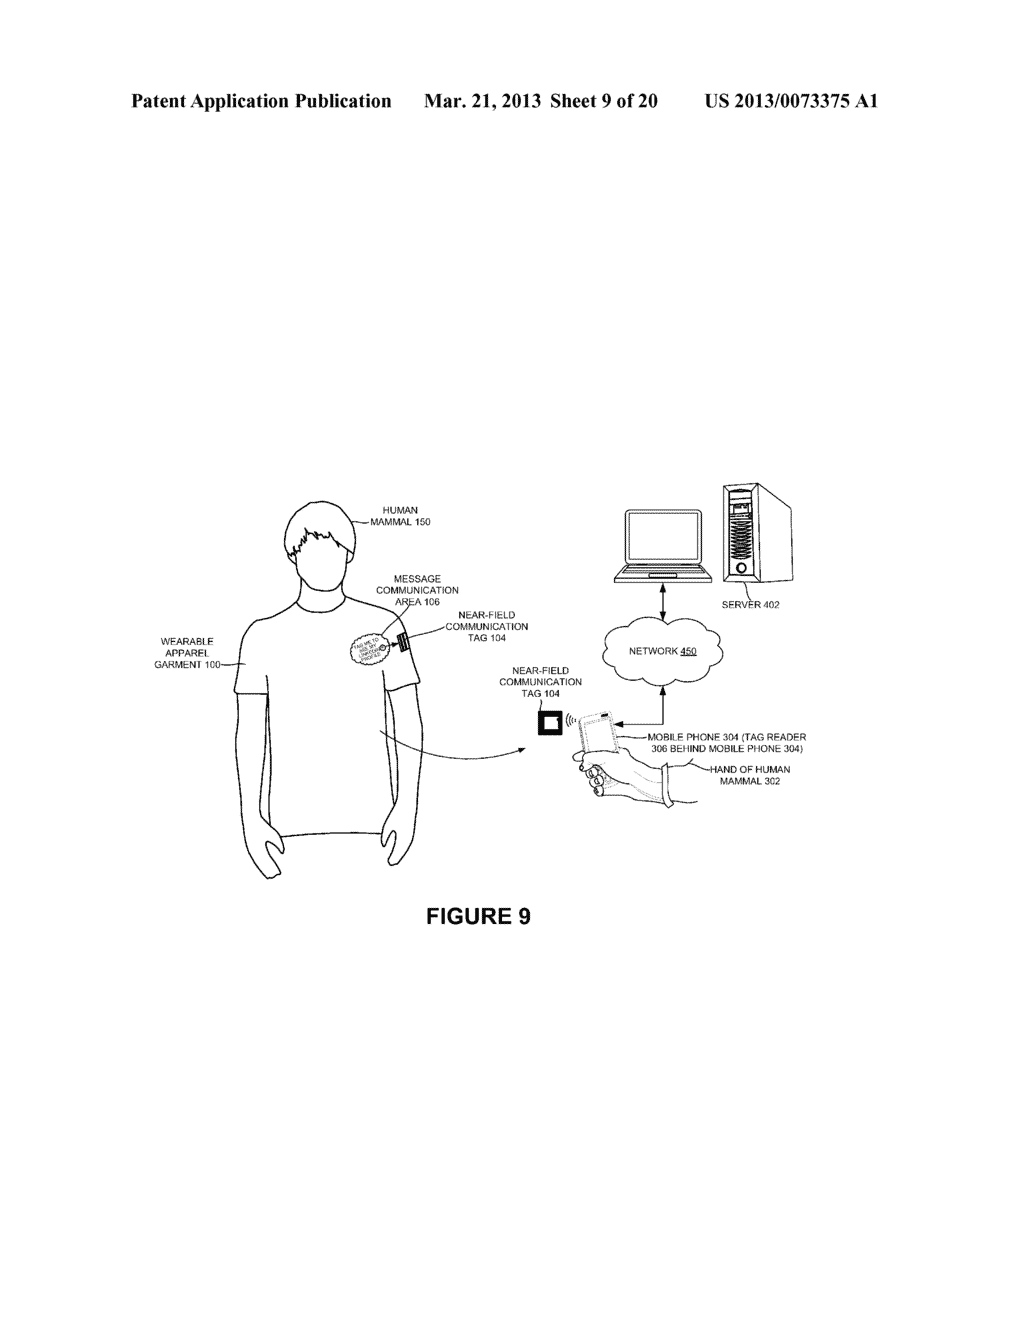 NEAR-FIELD COMMUNICATION ENABLED WEARABLE APPAREL GARMENT AND METHOD TO     CAPTURE GEOSPATIAL AND SOCIALLY RELEVANT DATA OF A WEARER OF THE WEARABLE     APPAREL GARMENT AND/OR A USER OF A READER DEVICE ASSOCIATED THEREWITH - diagram, schematic, and image 10